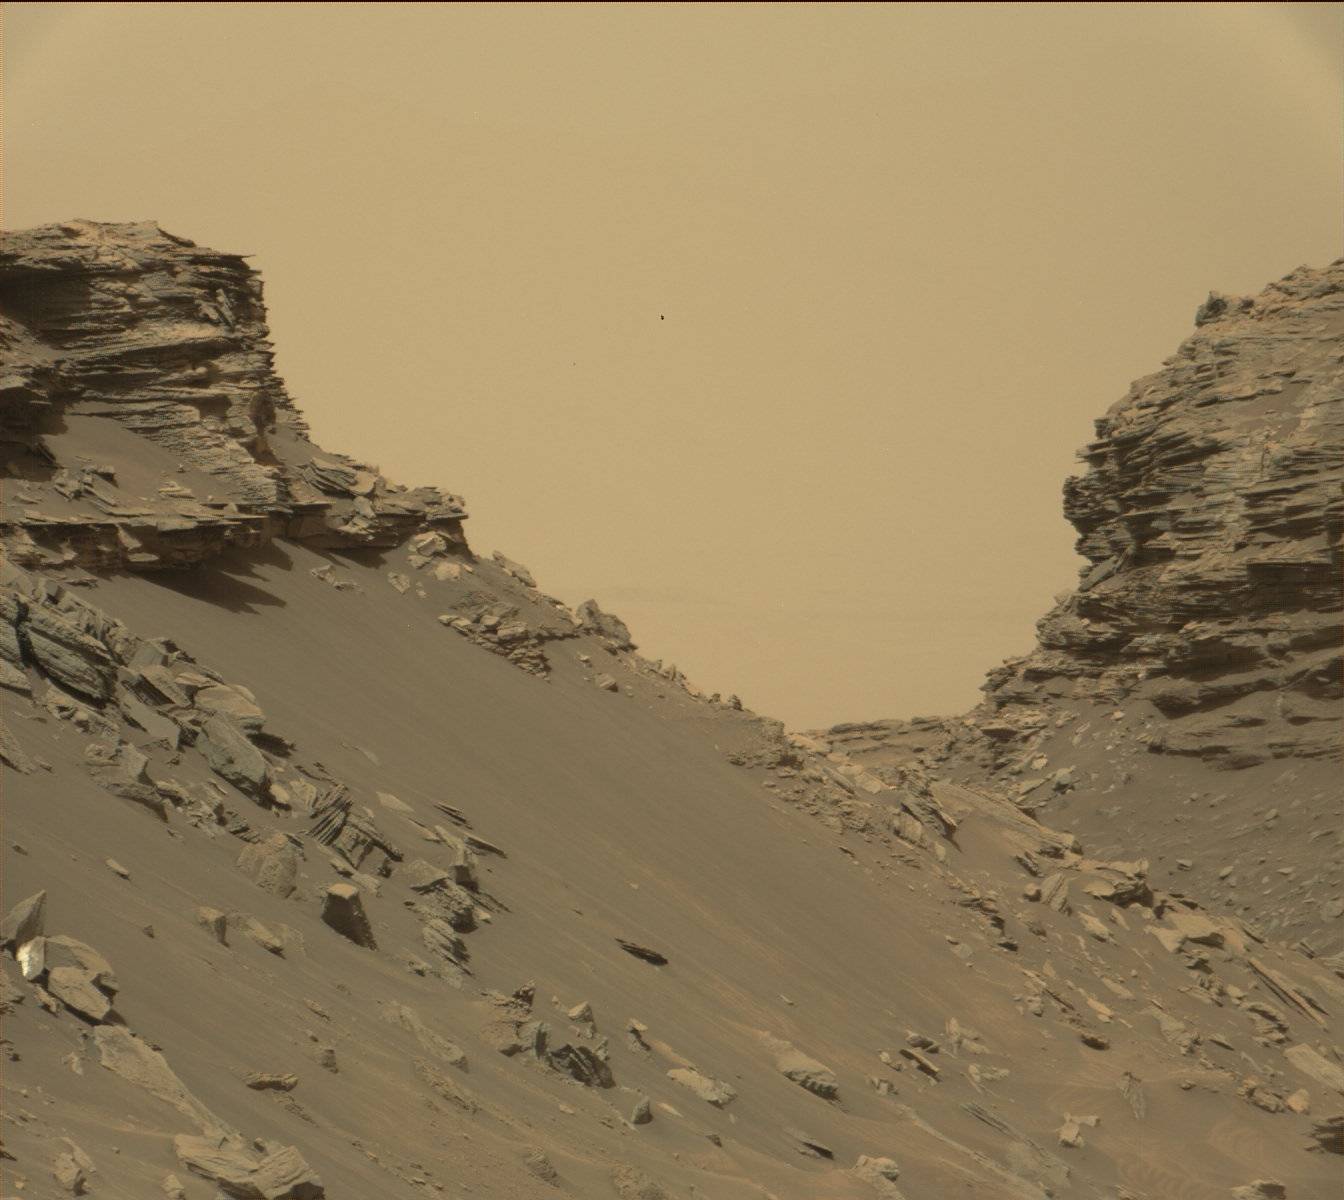 View from Mastcam on Curiosity showing sloping buttes and layered outcrops on lower Mount Sharp